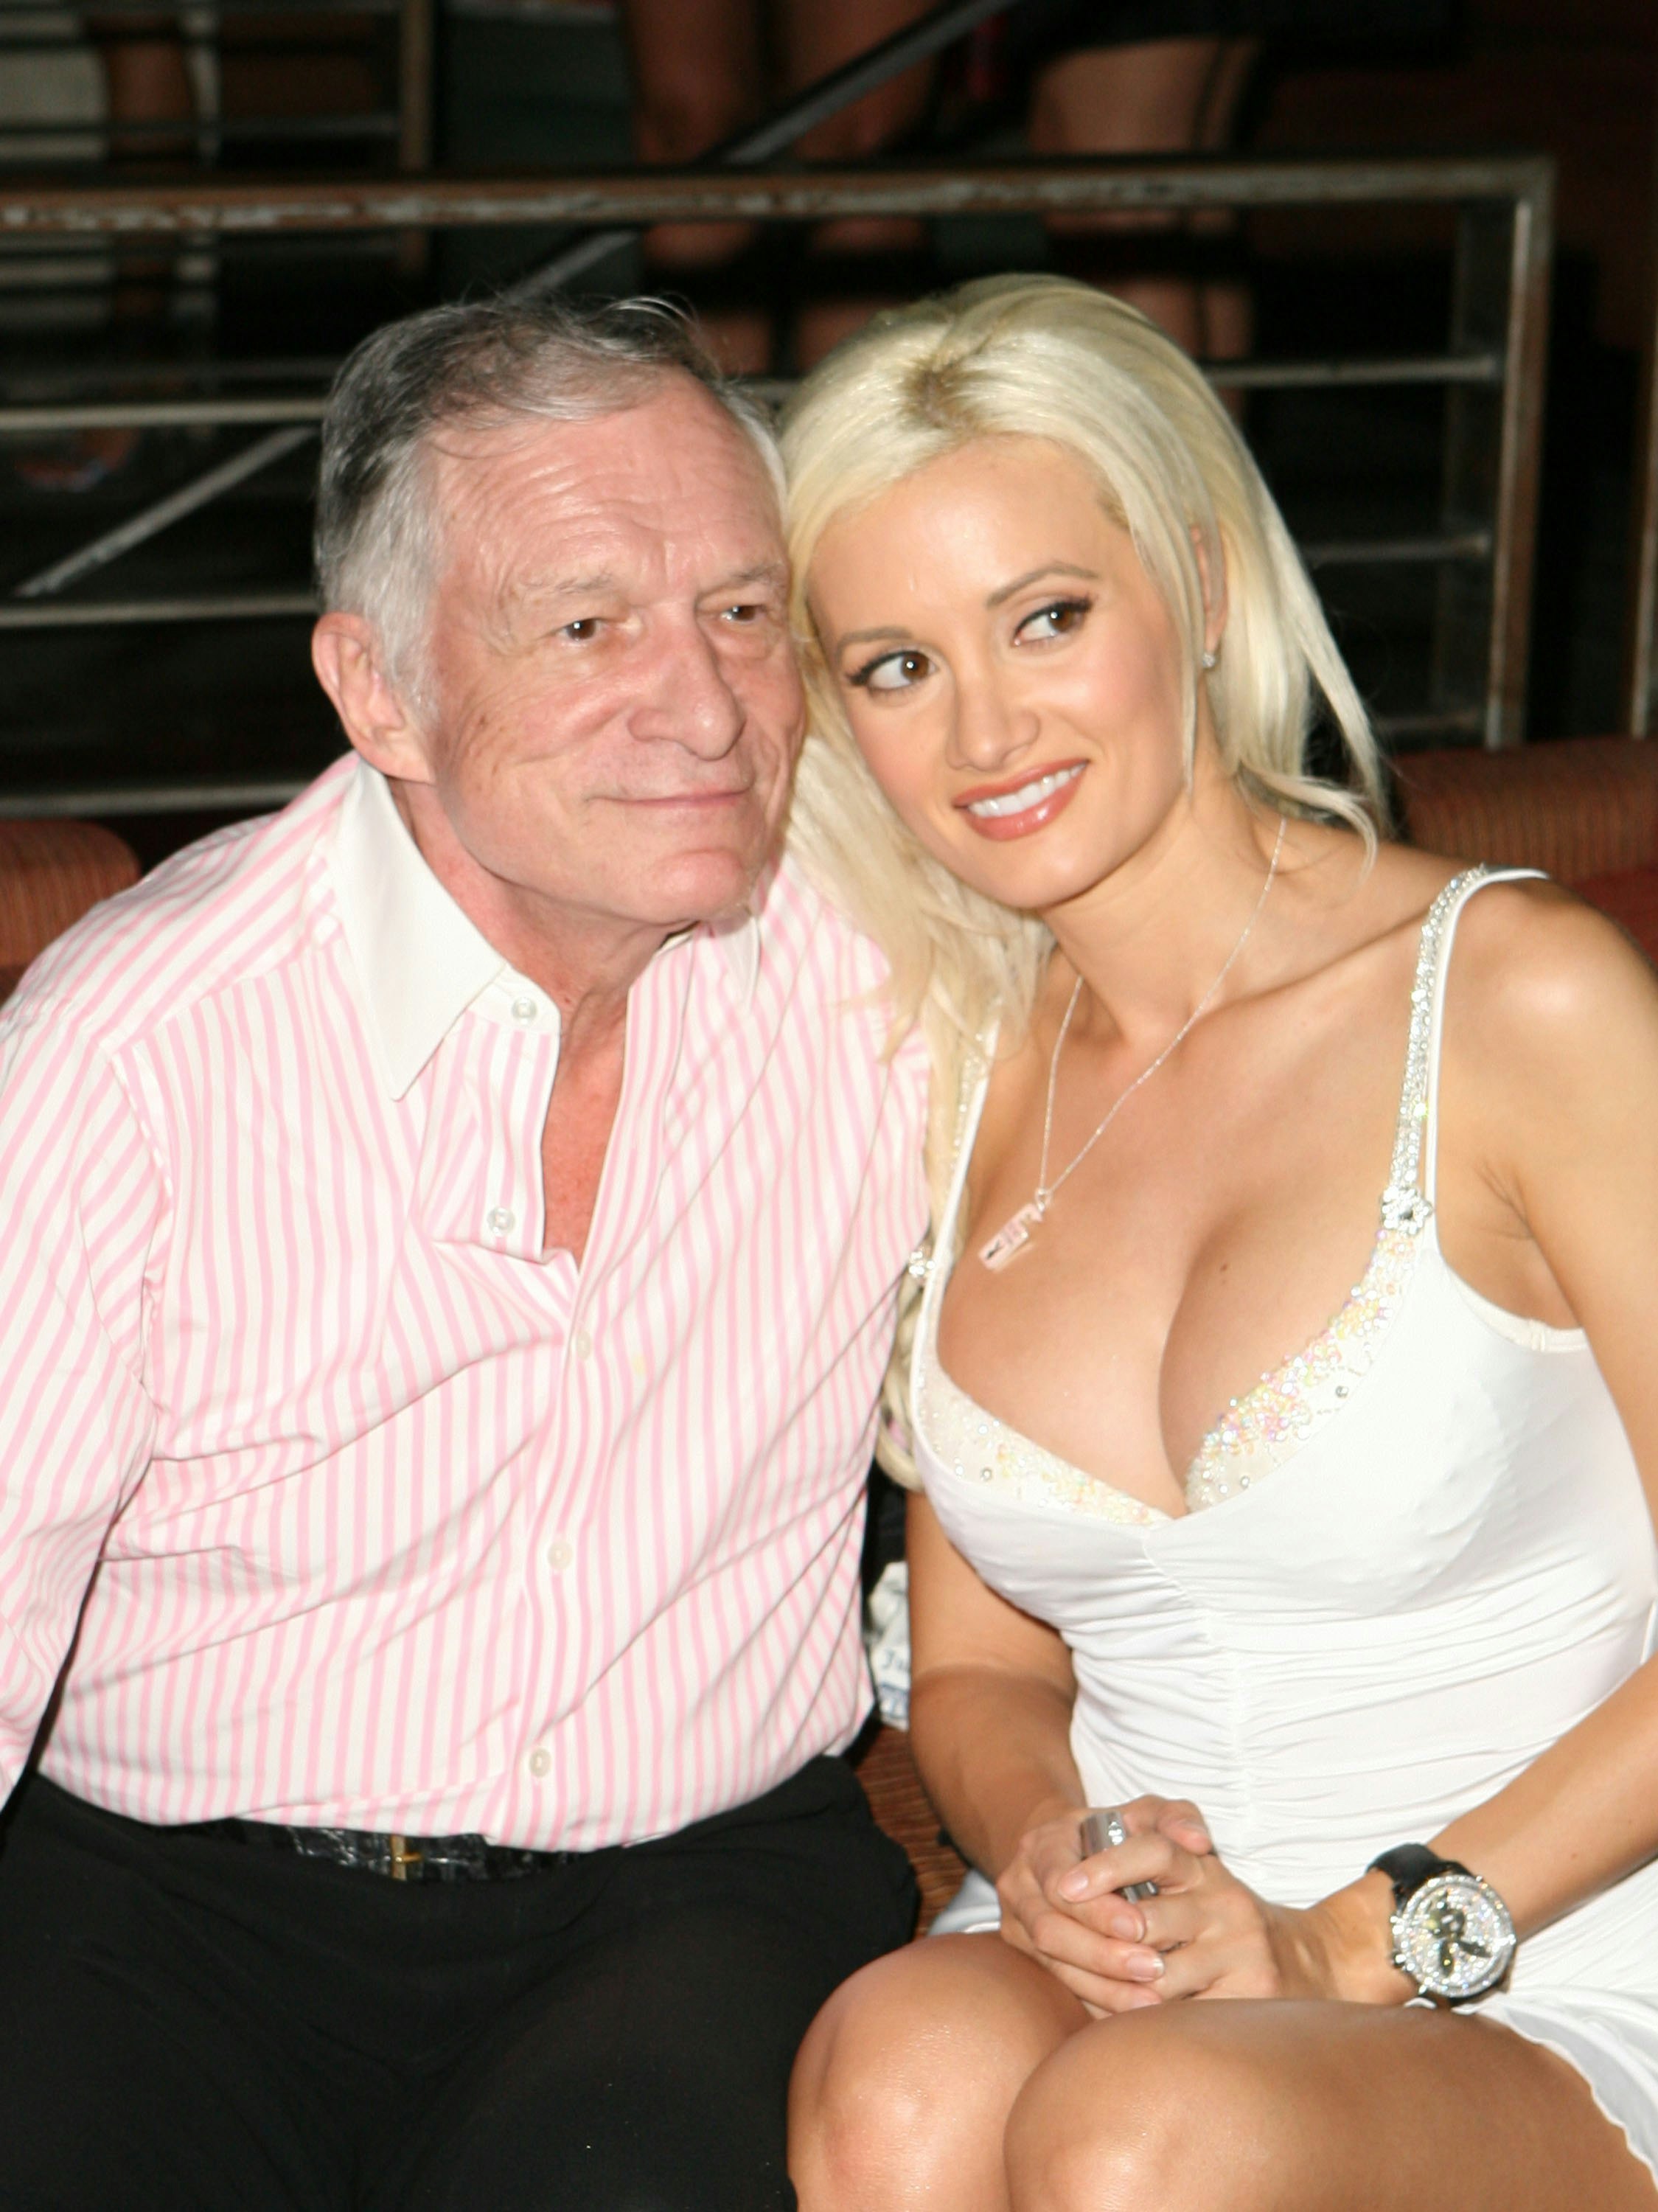 Holly Madison Recalls “Hell” Sex With High Hefner “He Wouldnt Move”